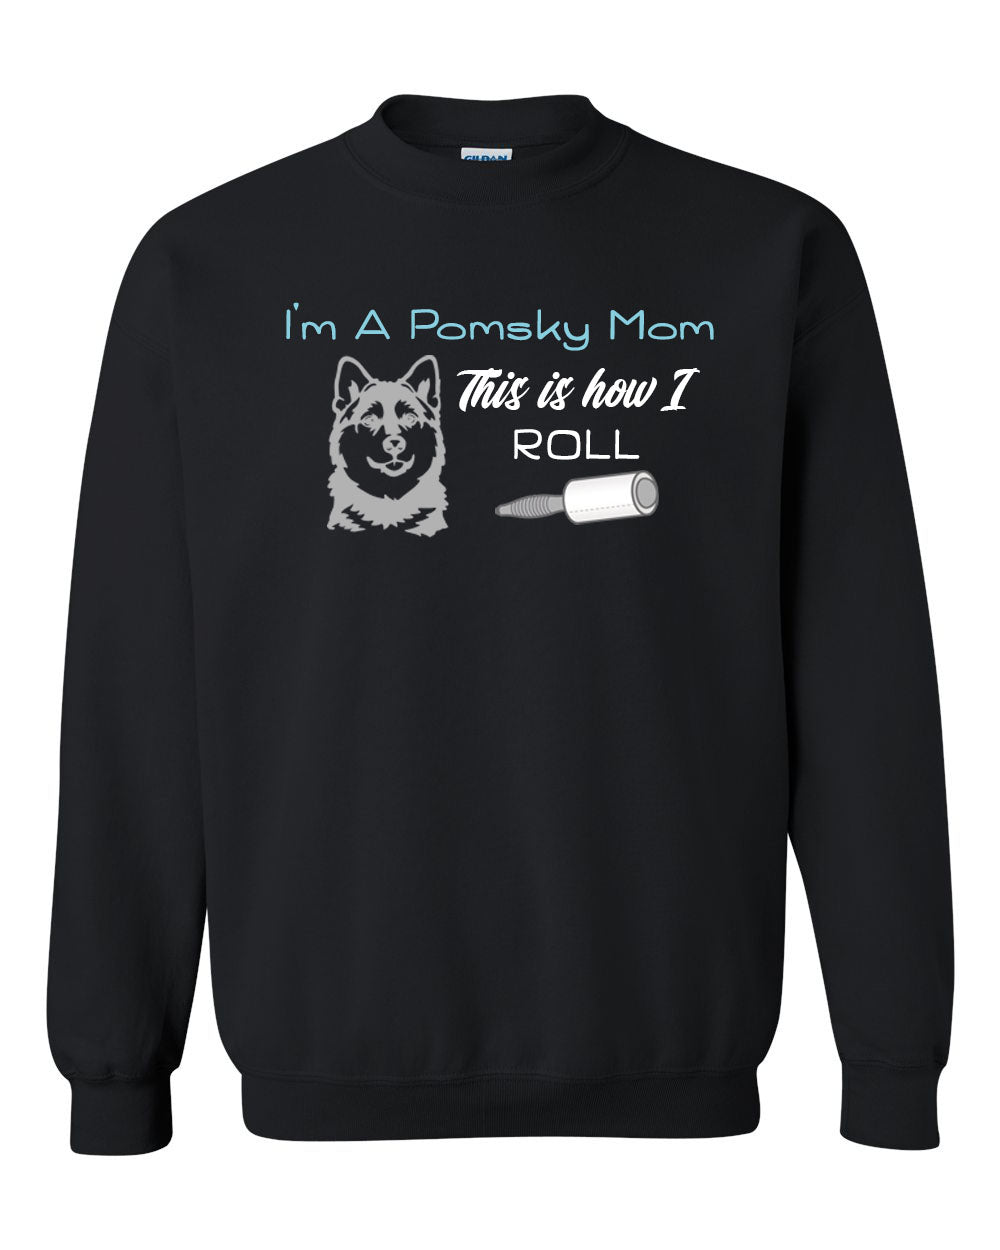 This is how I roll non hooded sweatshirt